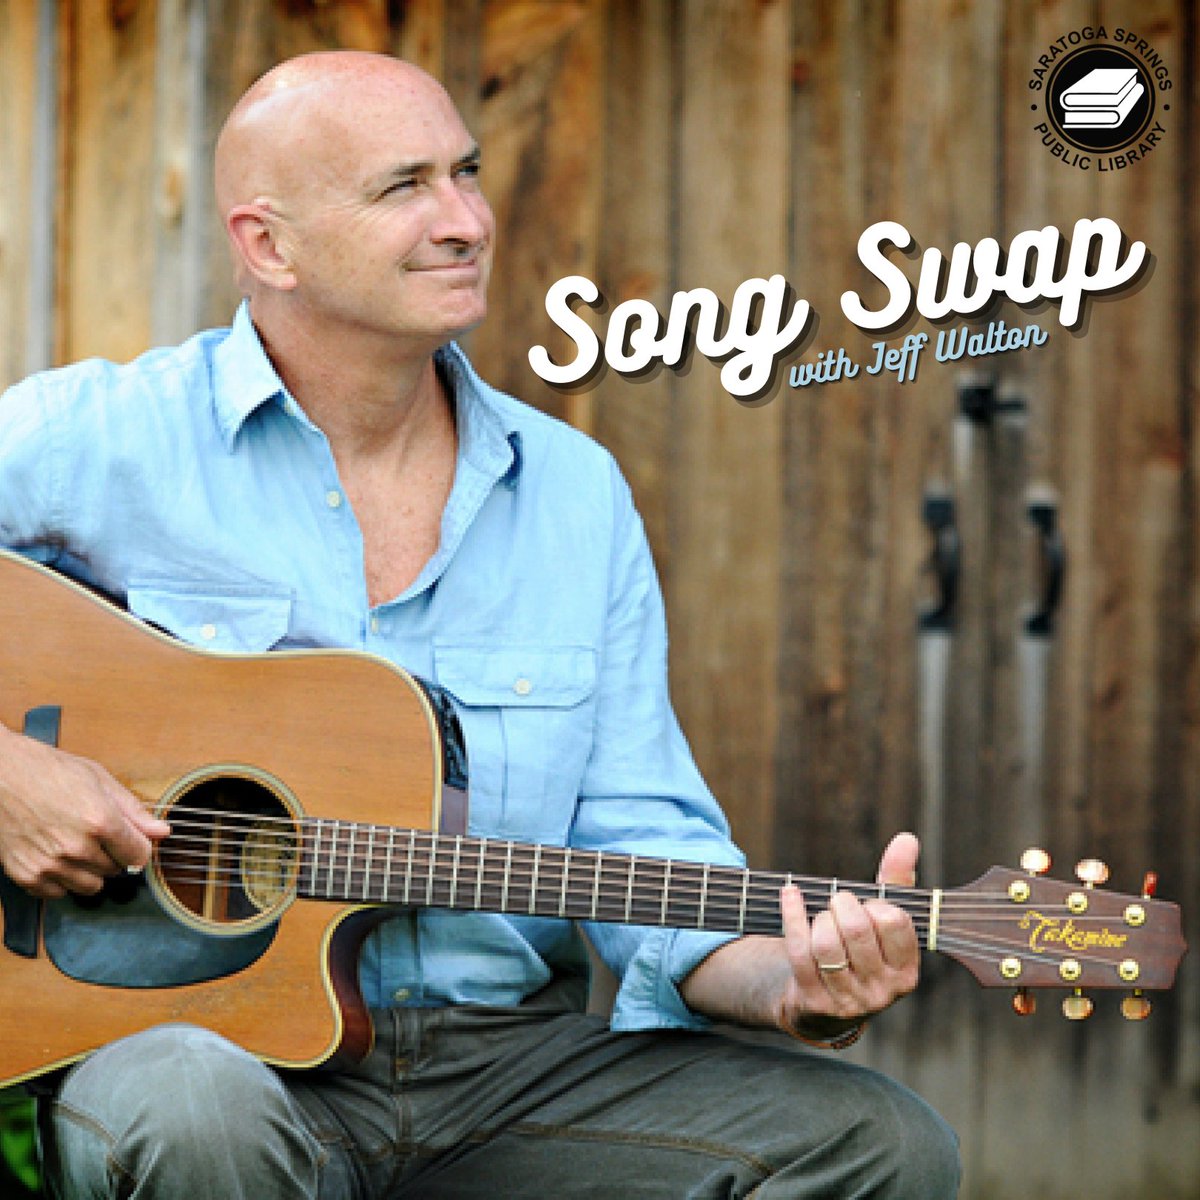 Grab your favorite acoustic (or electric!) instrument, bring your love of music, and join us for an informal #SongSwap led by local musician, Jeff Walton Mon., Aug. 28th at 7 p.m. Feel free to bring your own tune to play and share. #SSPL Register here: sspl.libcal.com/event/10532864